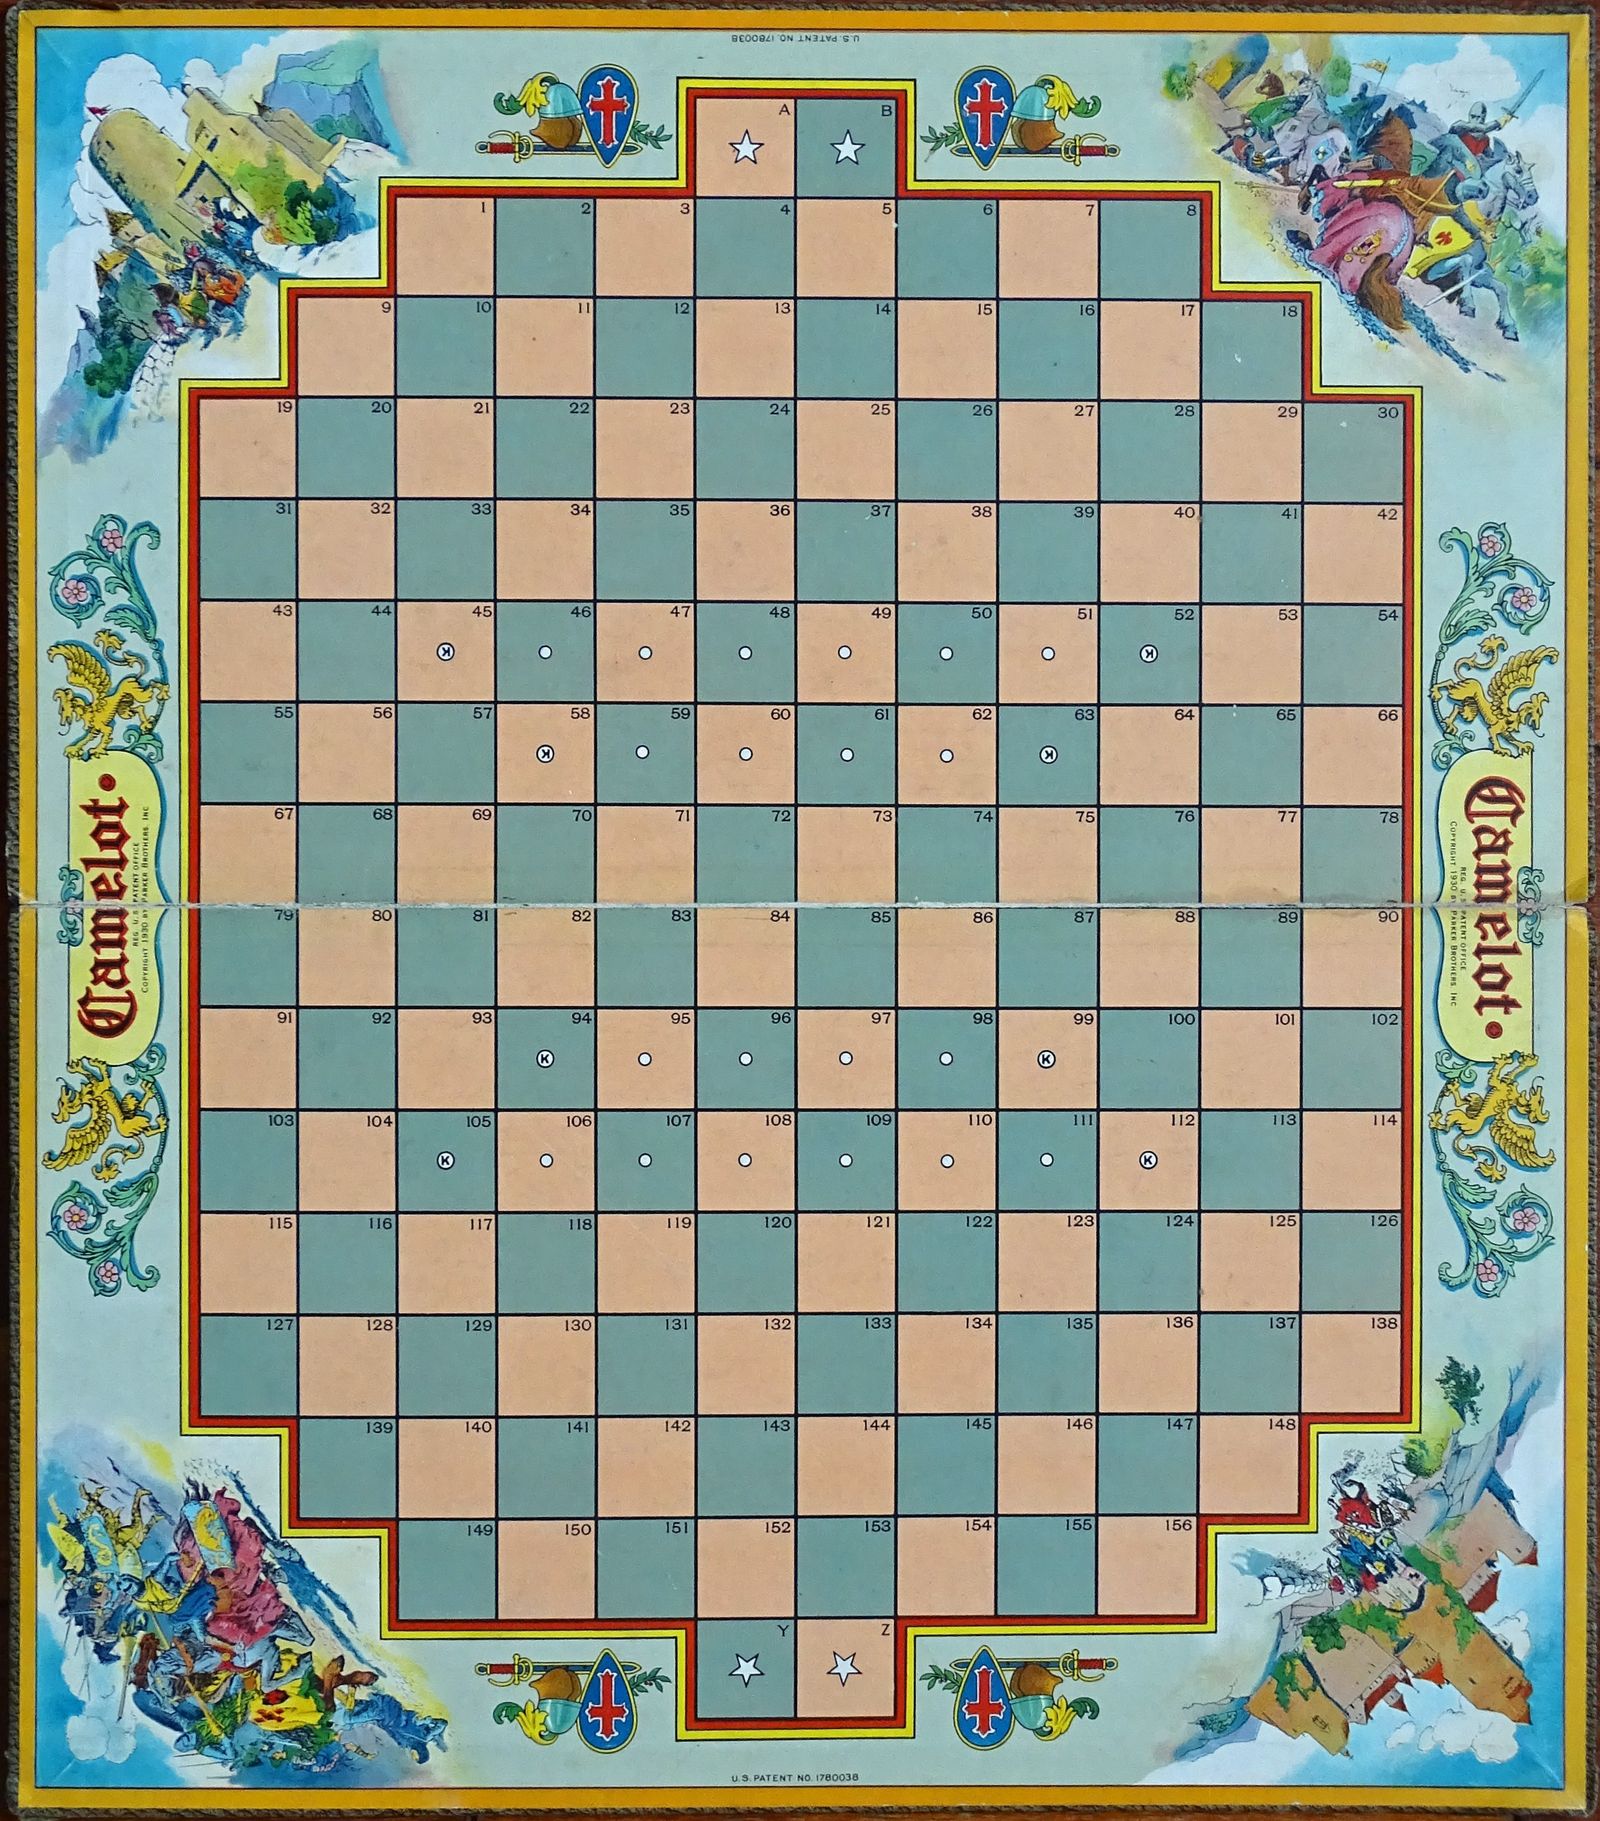 A chequered board with an unusual shape, missing the corner squares.